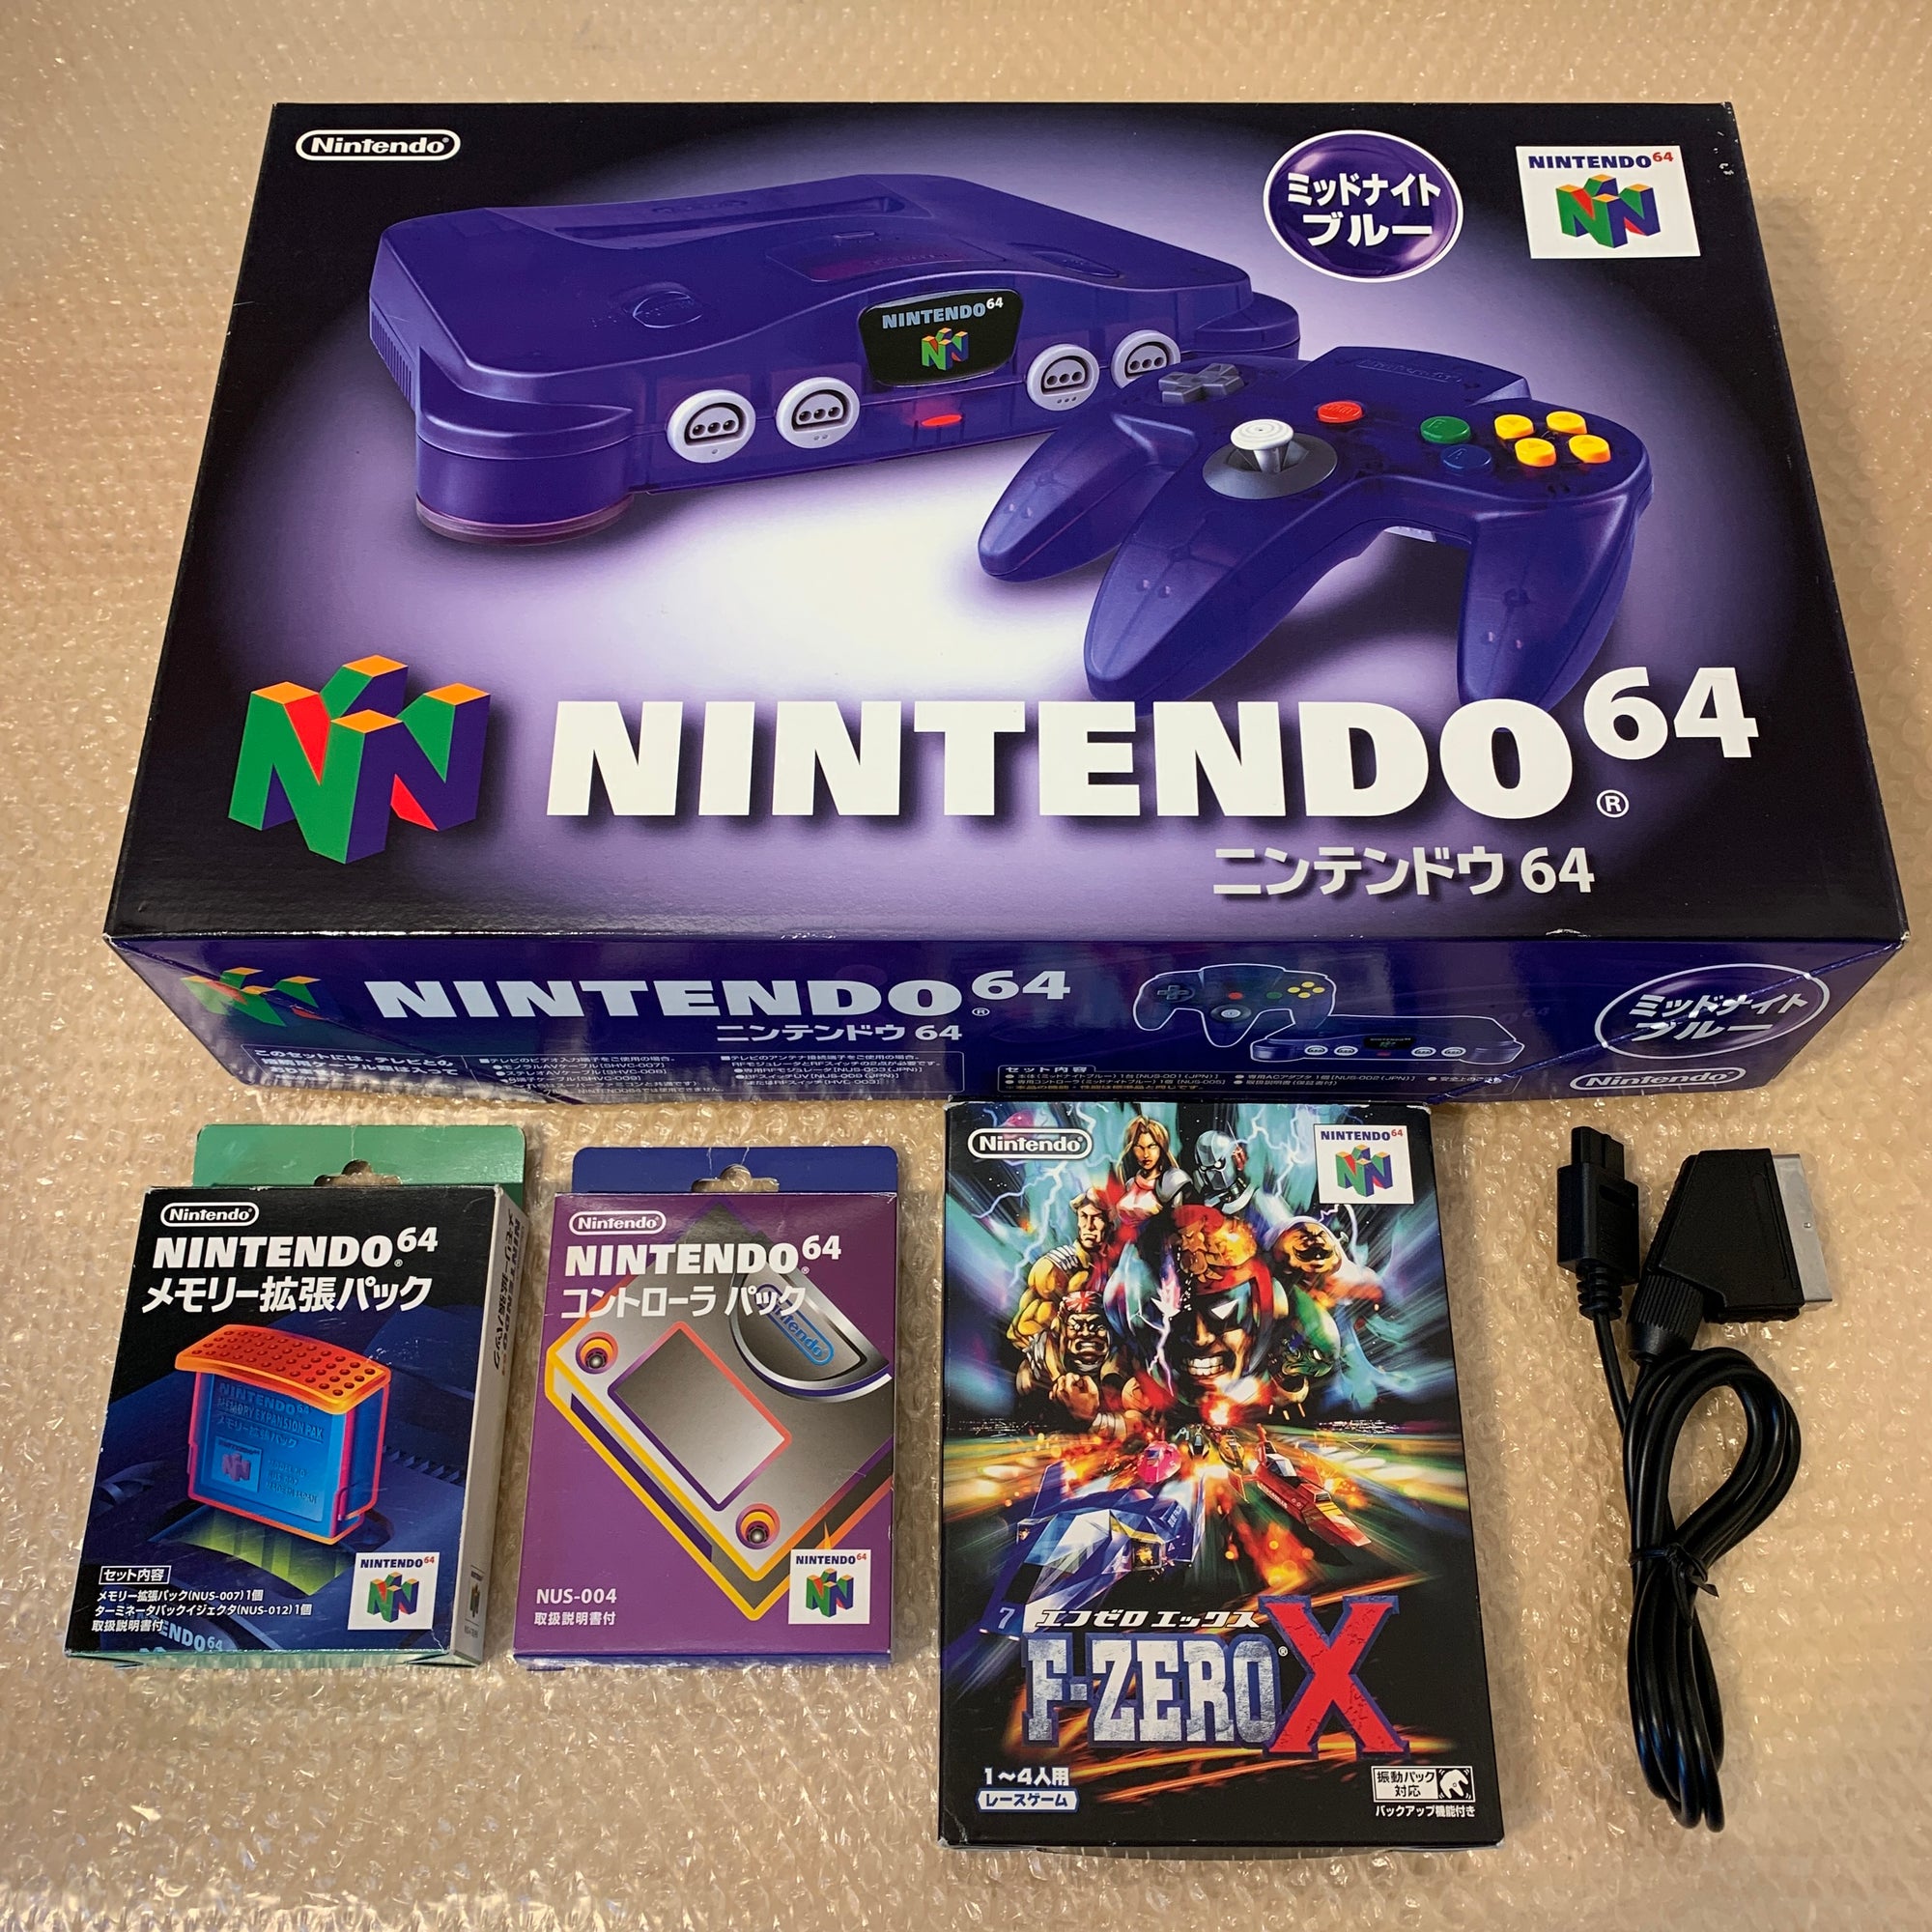 Boxed Midnight Blue Nintendo 64 set with N64Digital kit - compatible with JP and US games